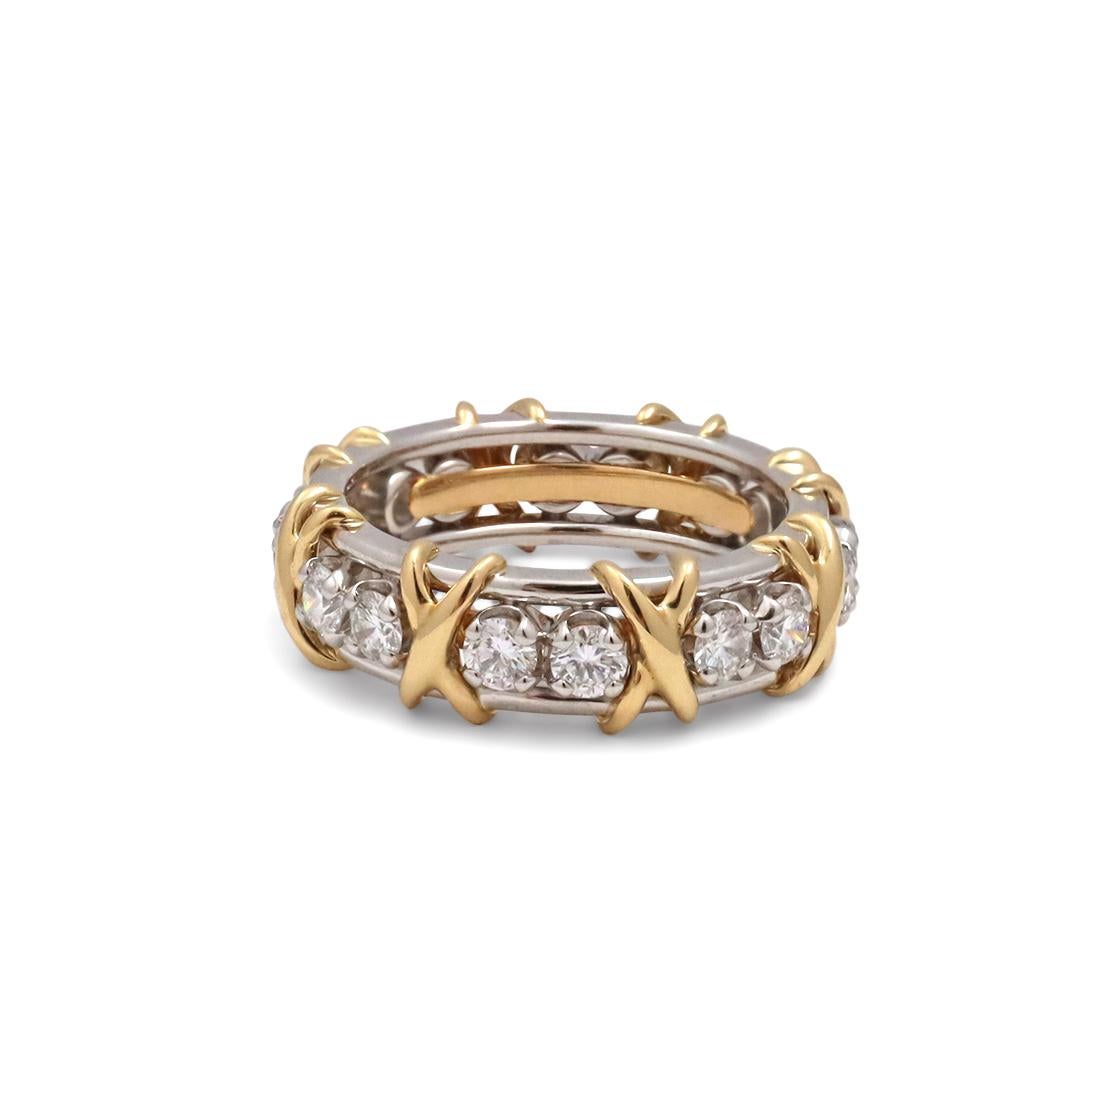 Authentic Schlumberger for Tiffany & Co. ring crafted in platinum comprised of alternating 18 karat yellow gold X's and sixteen sparkling round brilliant cut diamonds weighing an estimated 1.12 carats (G-H, VS). Signed Tiffany & Co. Schlumberger